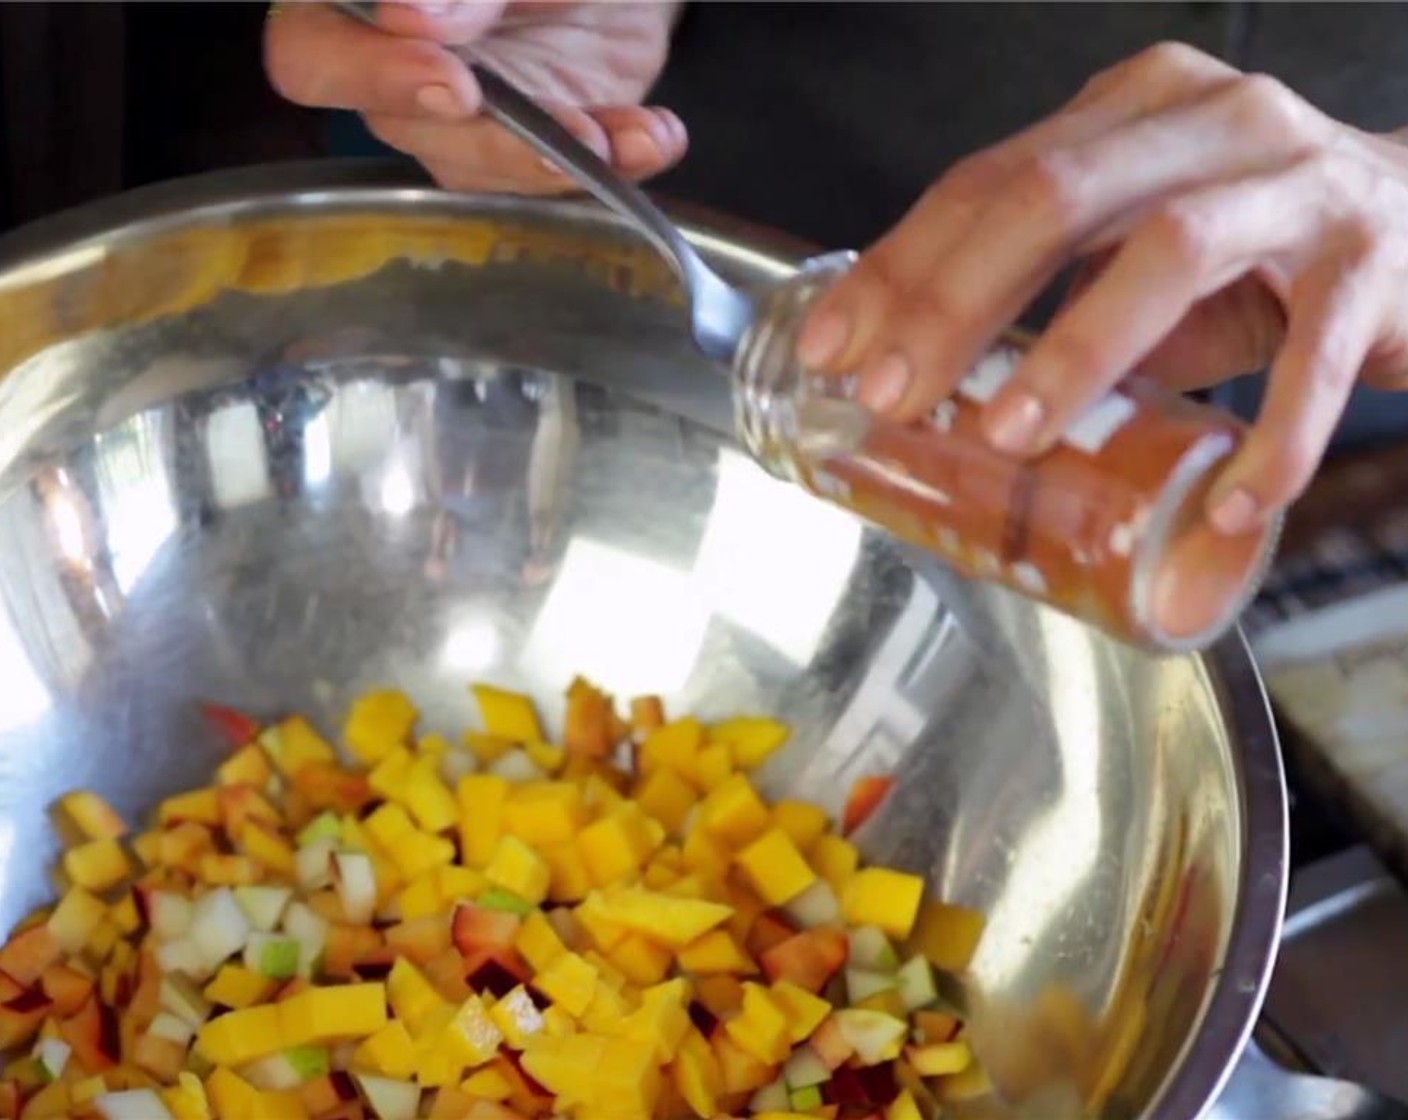 step 3 Dice Plum (1 cup), Pineapple (1 cup), Mango (1 cup), and Peach (1 cup) and add to a large mixing bowl. Add Cayenne Pepper (1 tsp), Whole Coriander Seeds (1/2 Tbsp) and Ground Cinnamon (1/2 Tbsp)